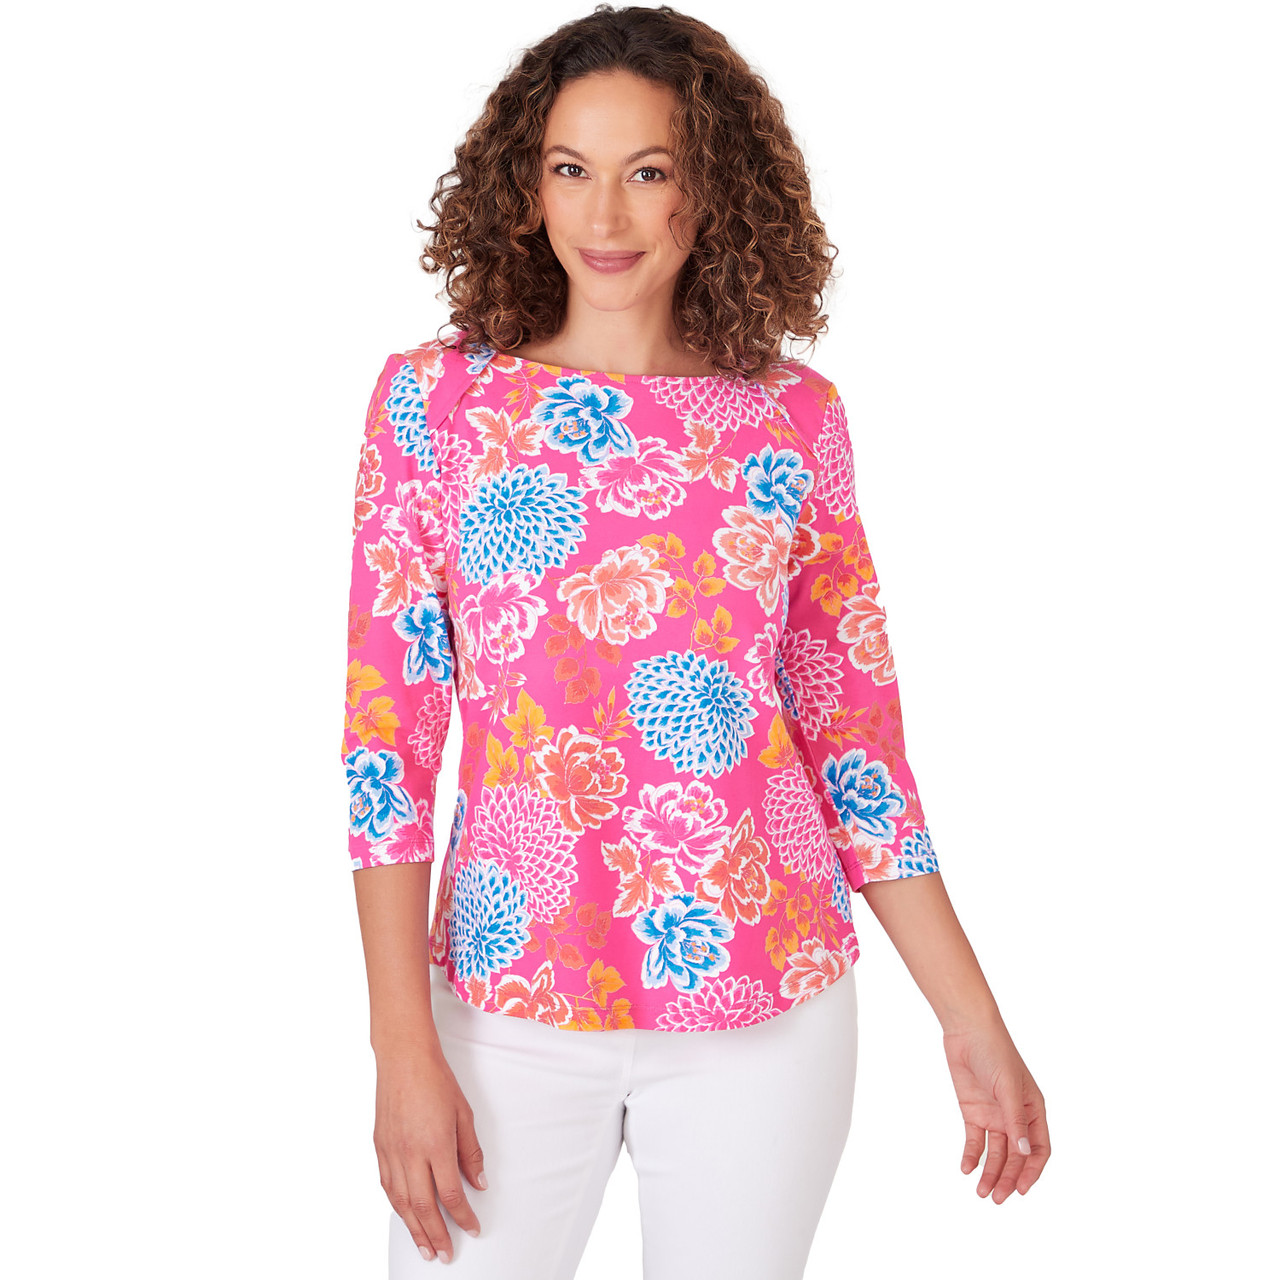 Women's Mums Stretch Cotton Top | Ruby Rd.